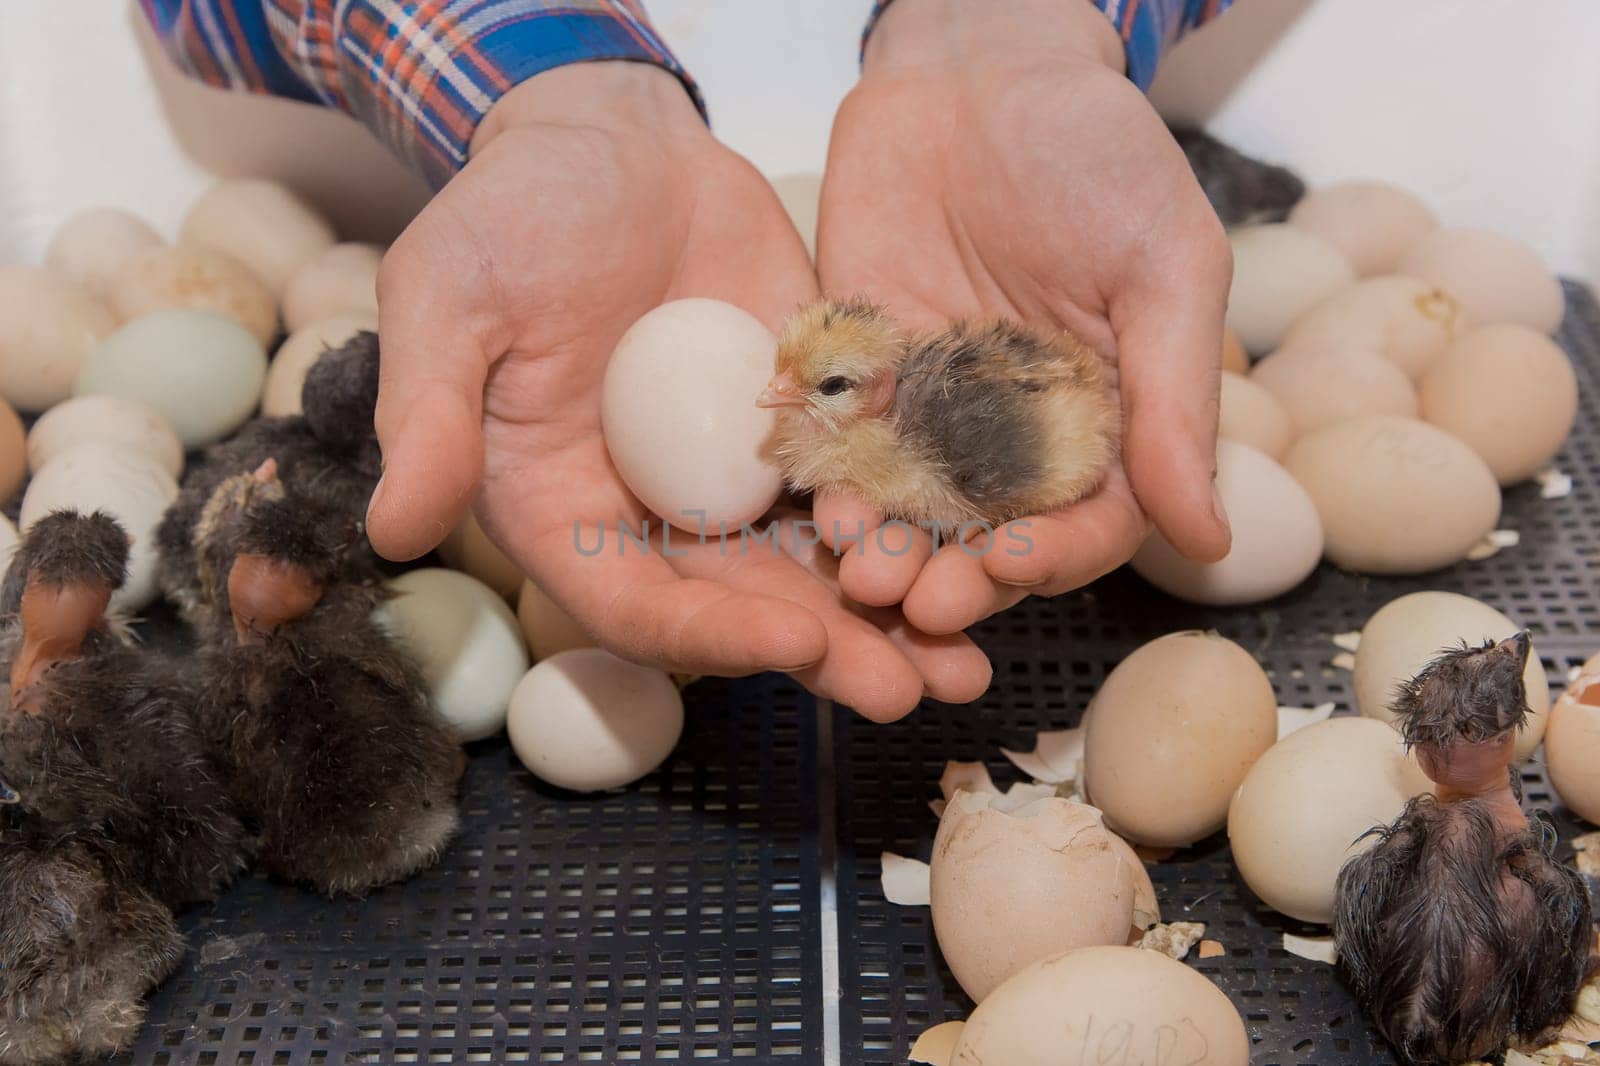 The hands of a male farmer hold a chicken egg and a small fluffy chick next to an incubation in an incubator.